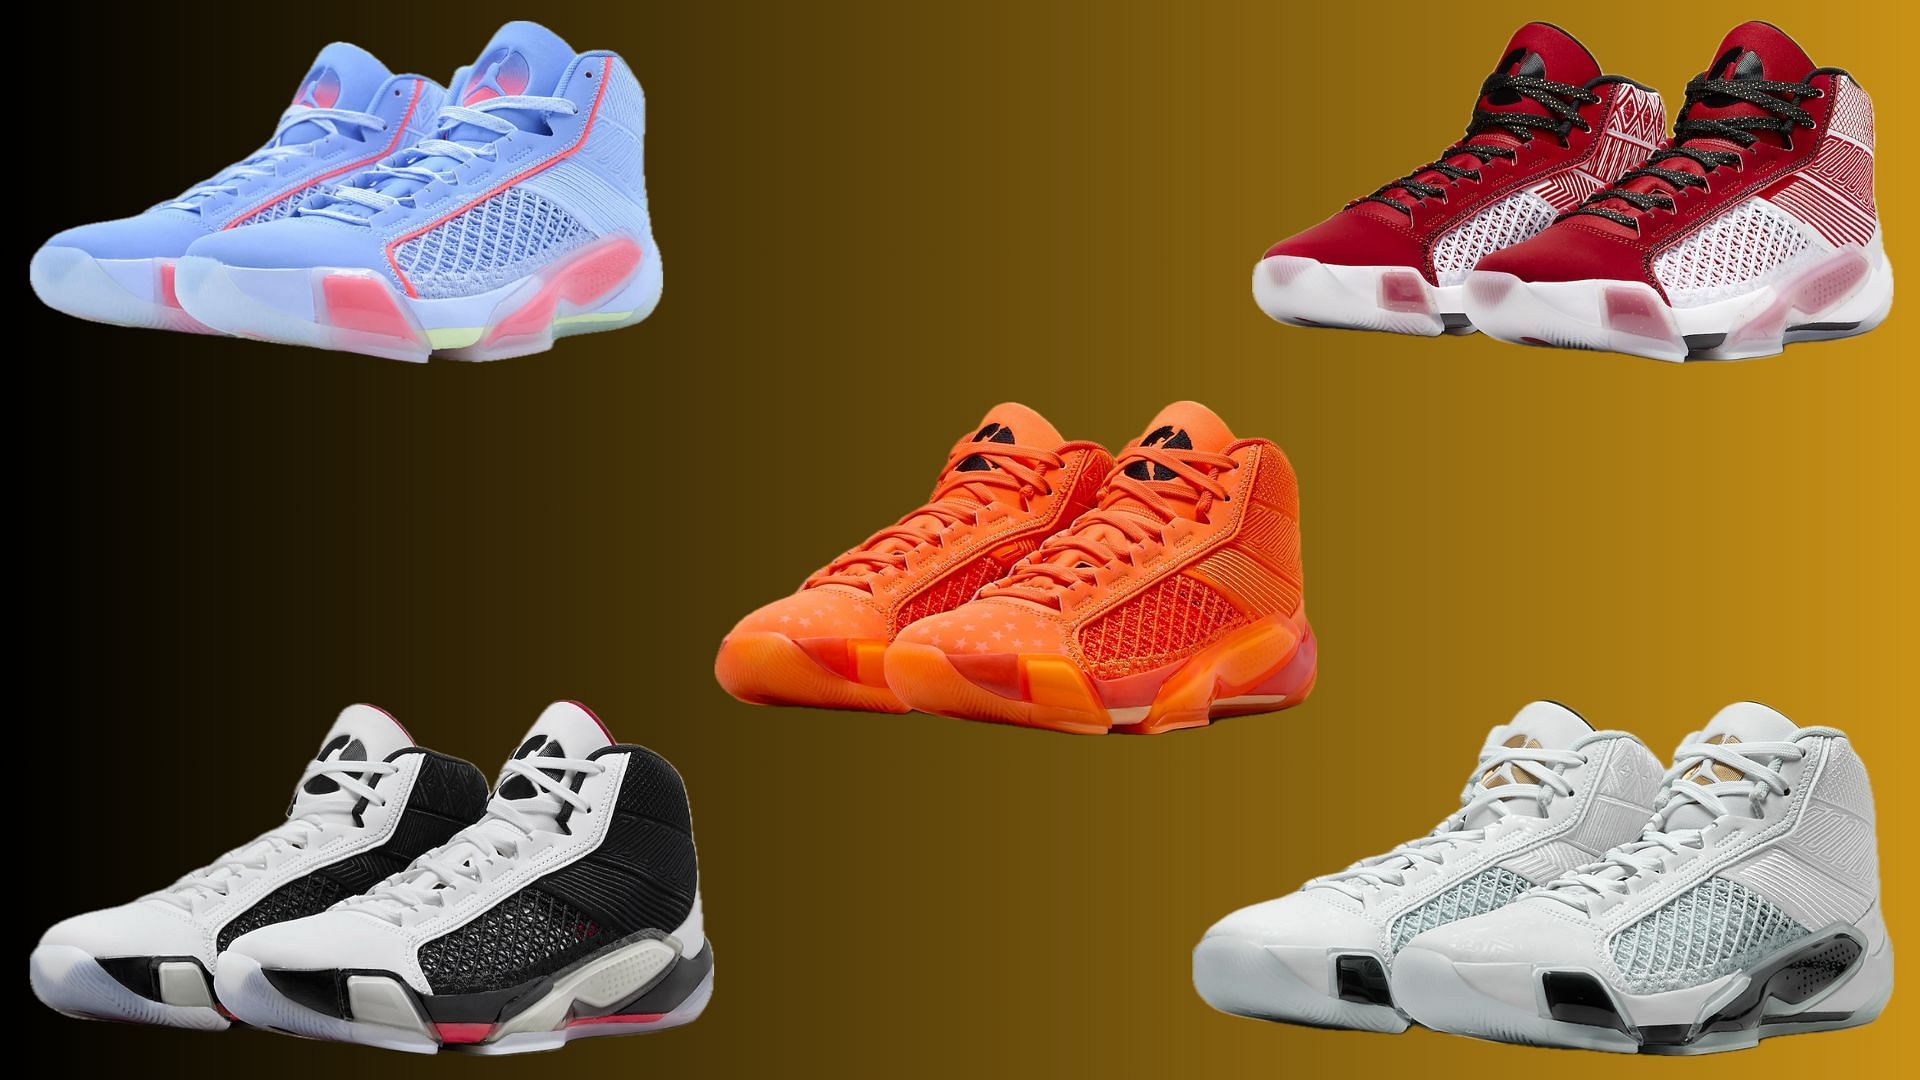 Air Jordan 38 colorways you can look out for in 2023 (Image via Nike)